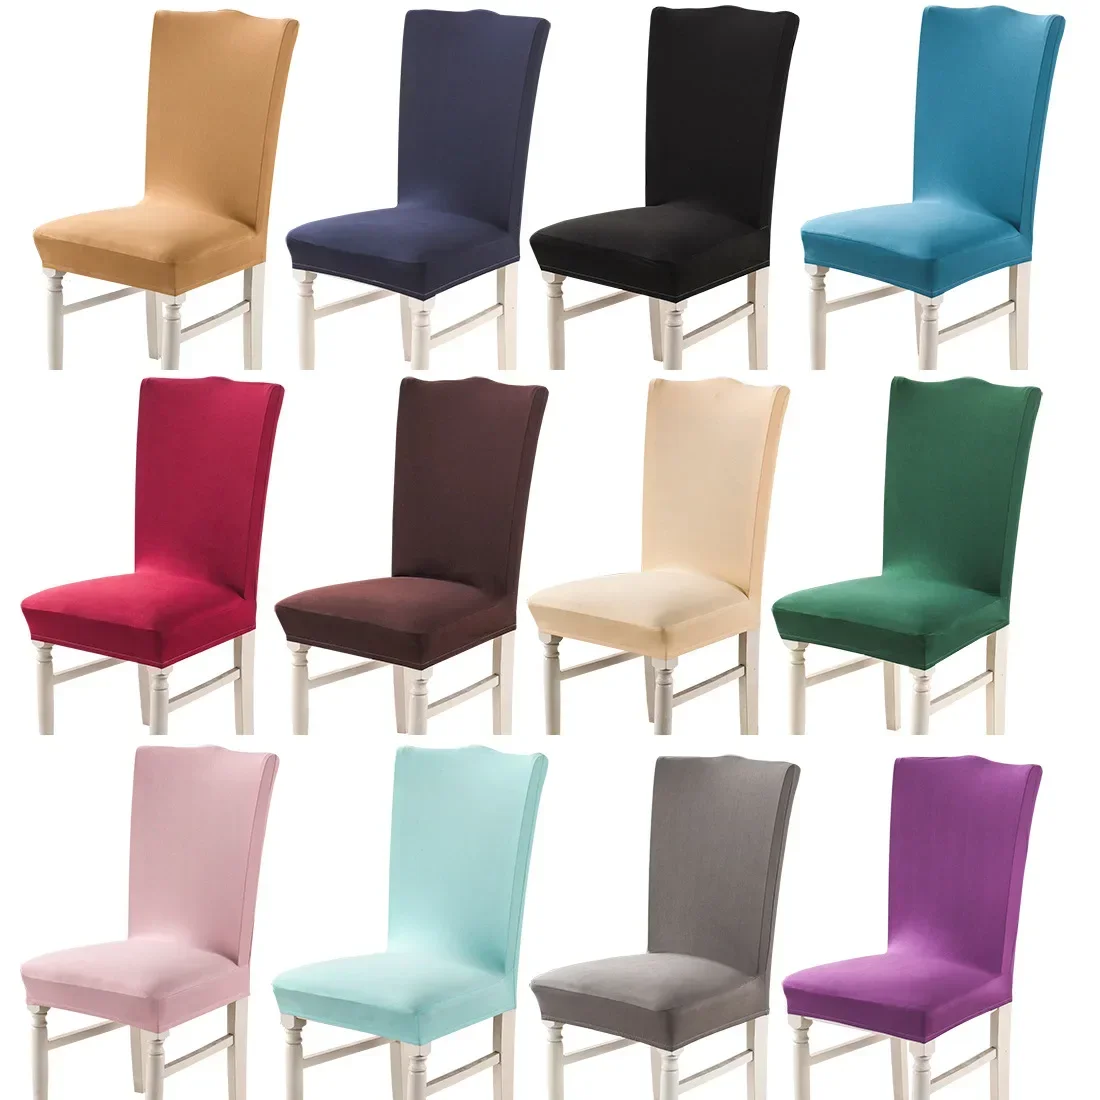 

32 Colors For Choice Universal Size Chair Cover Cheap Big Elasticity Seat Protector Seat Case Chair Covers For Hotel Living Room